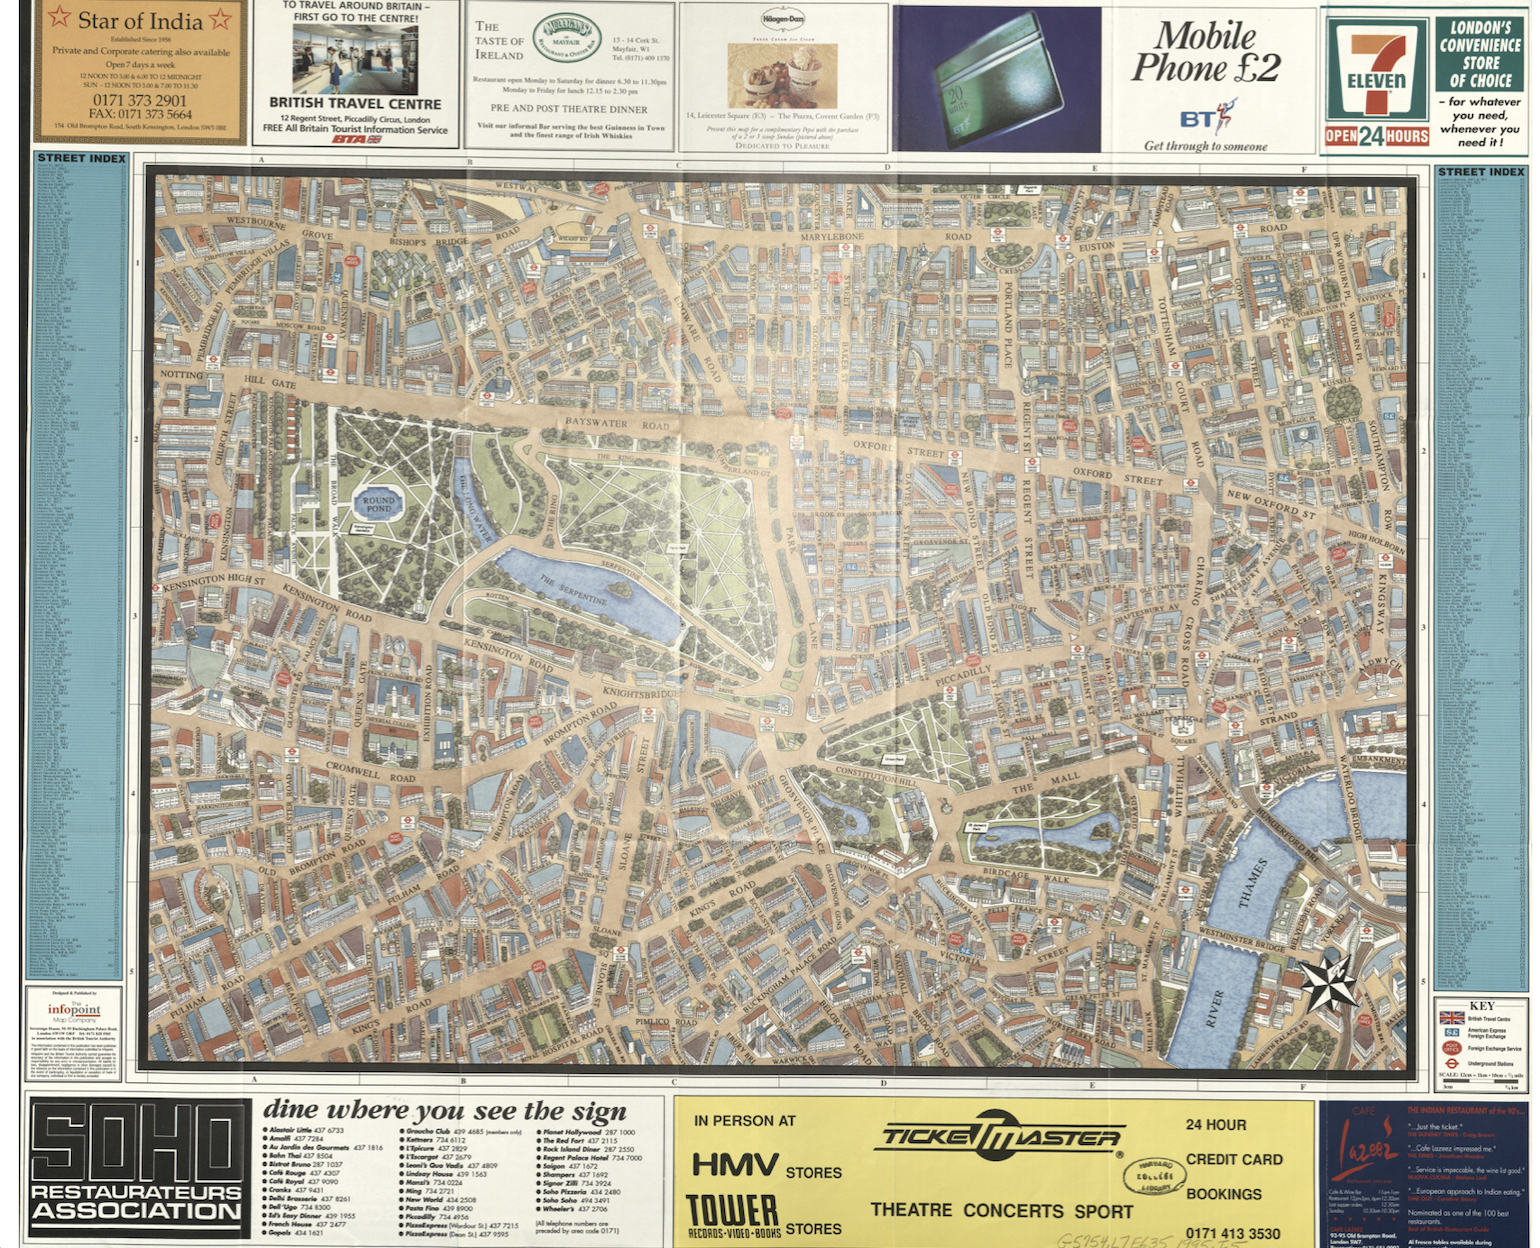 Scan of a paper map showing information about restaurants in London